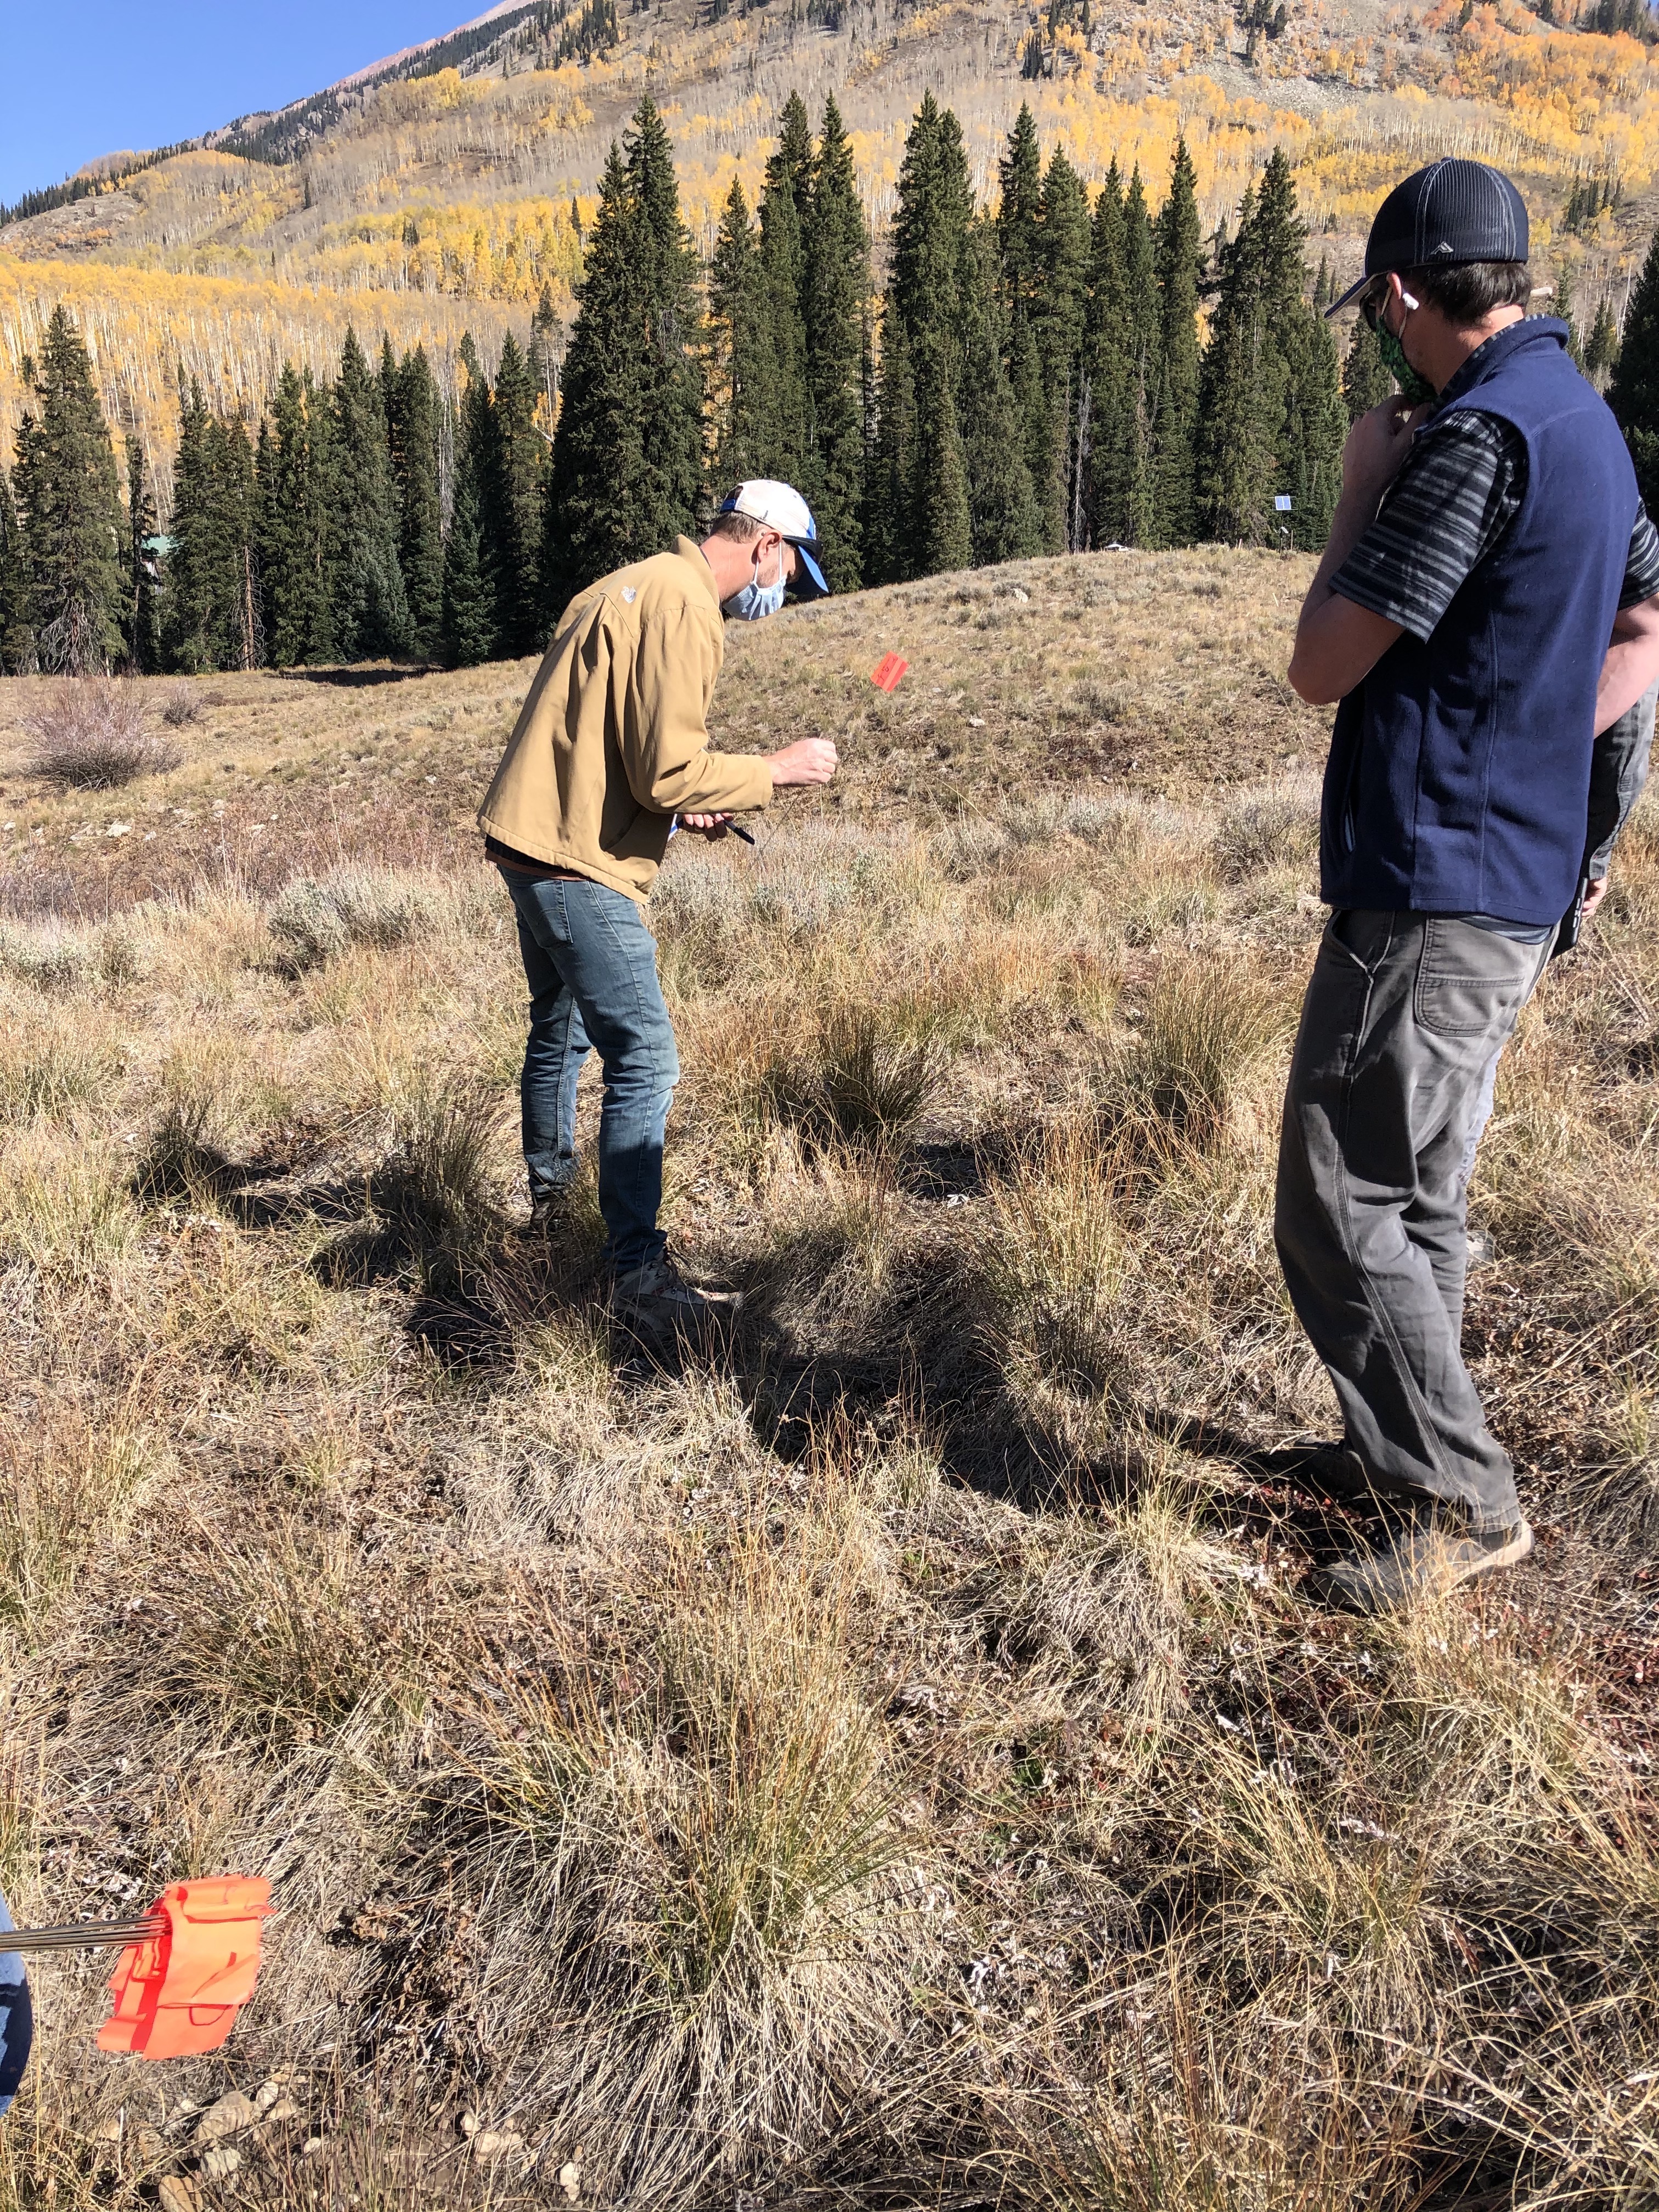 ARM team members Heath Powers and John Bilberry lay down markers for instruments at Rocky Mountain Biological Laboratory in Colorado